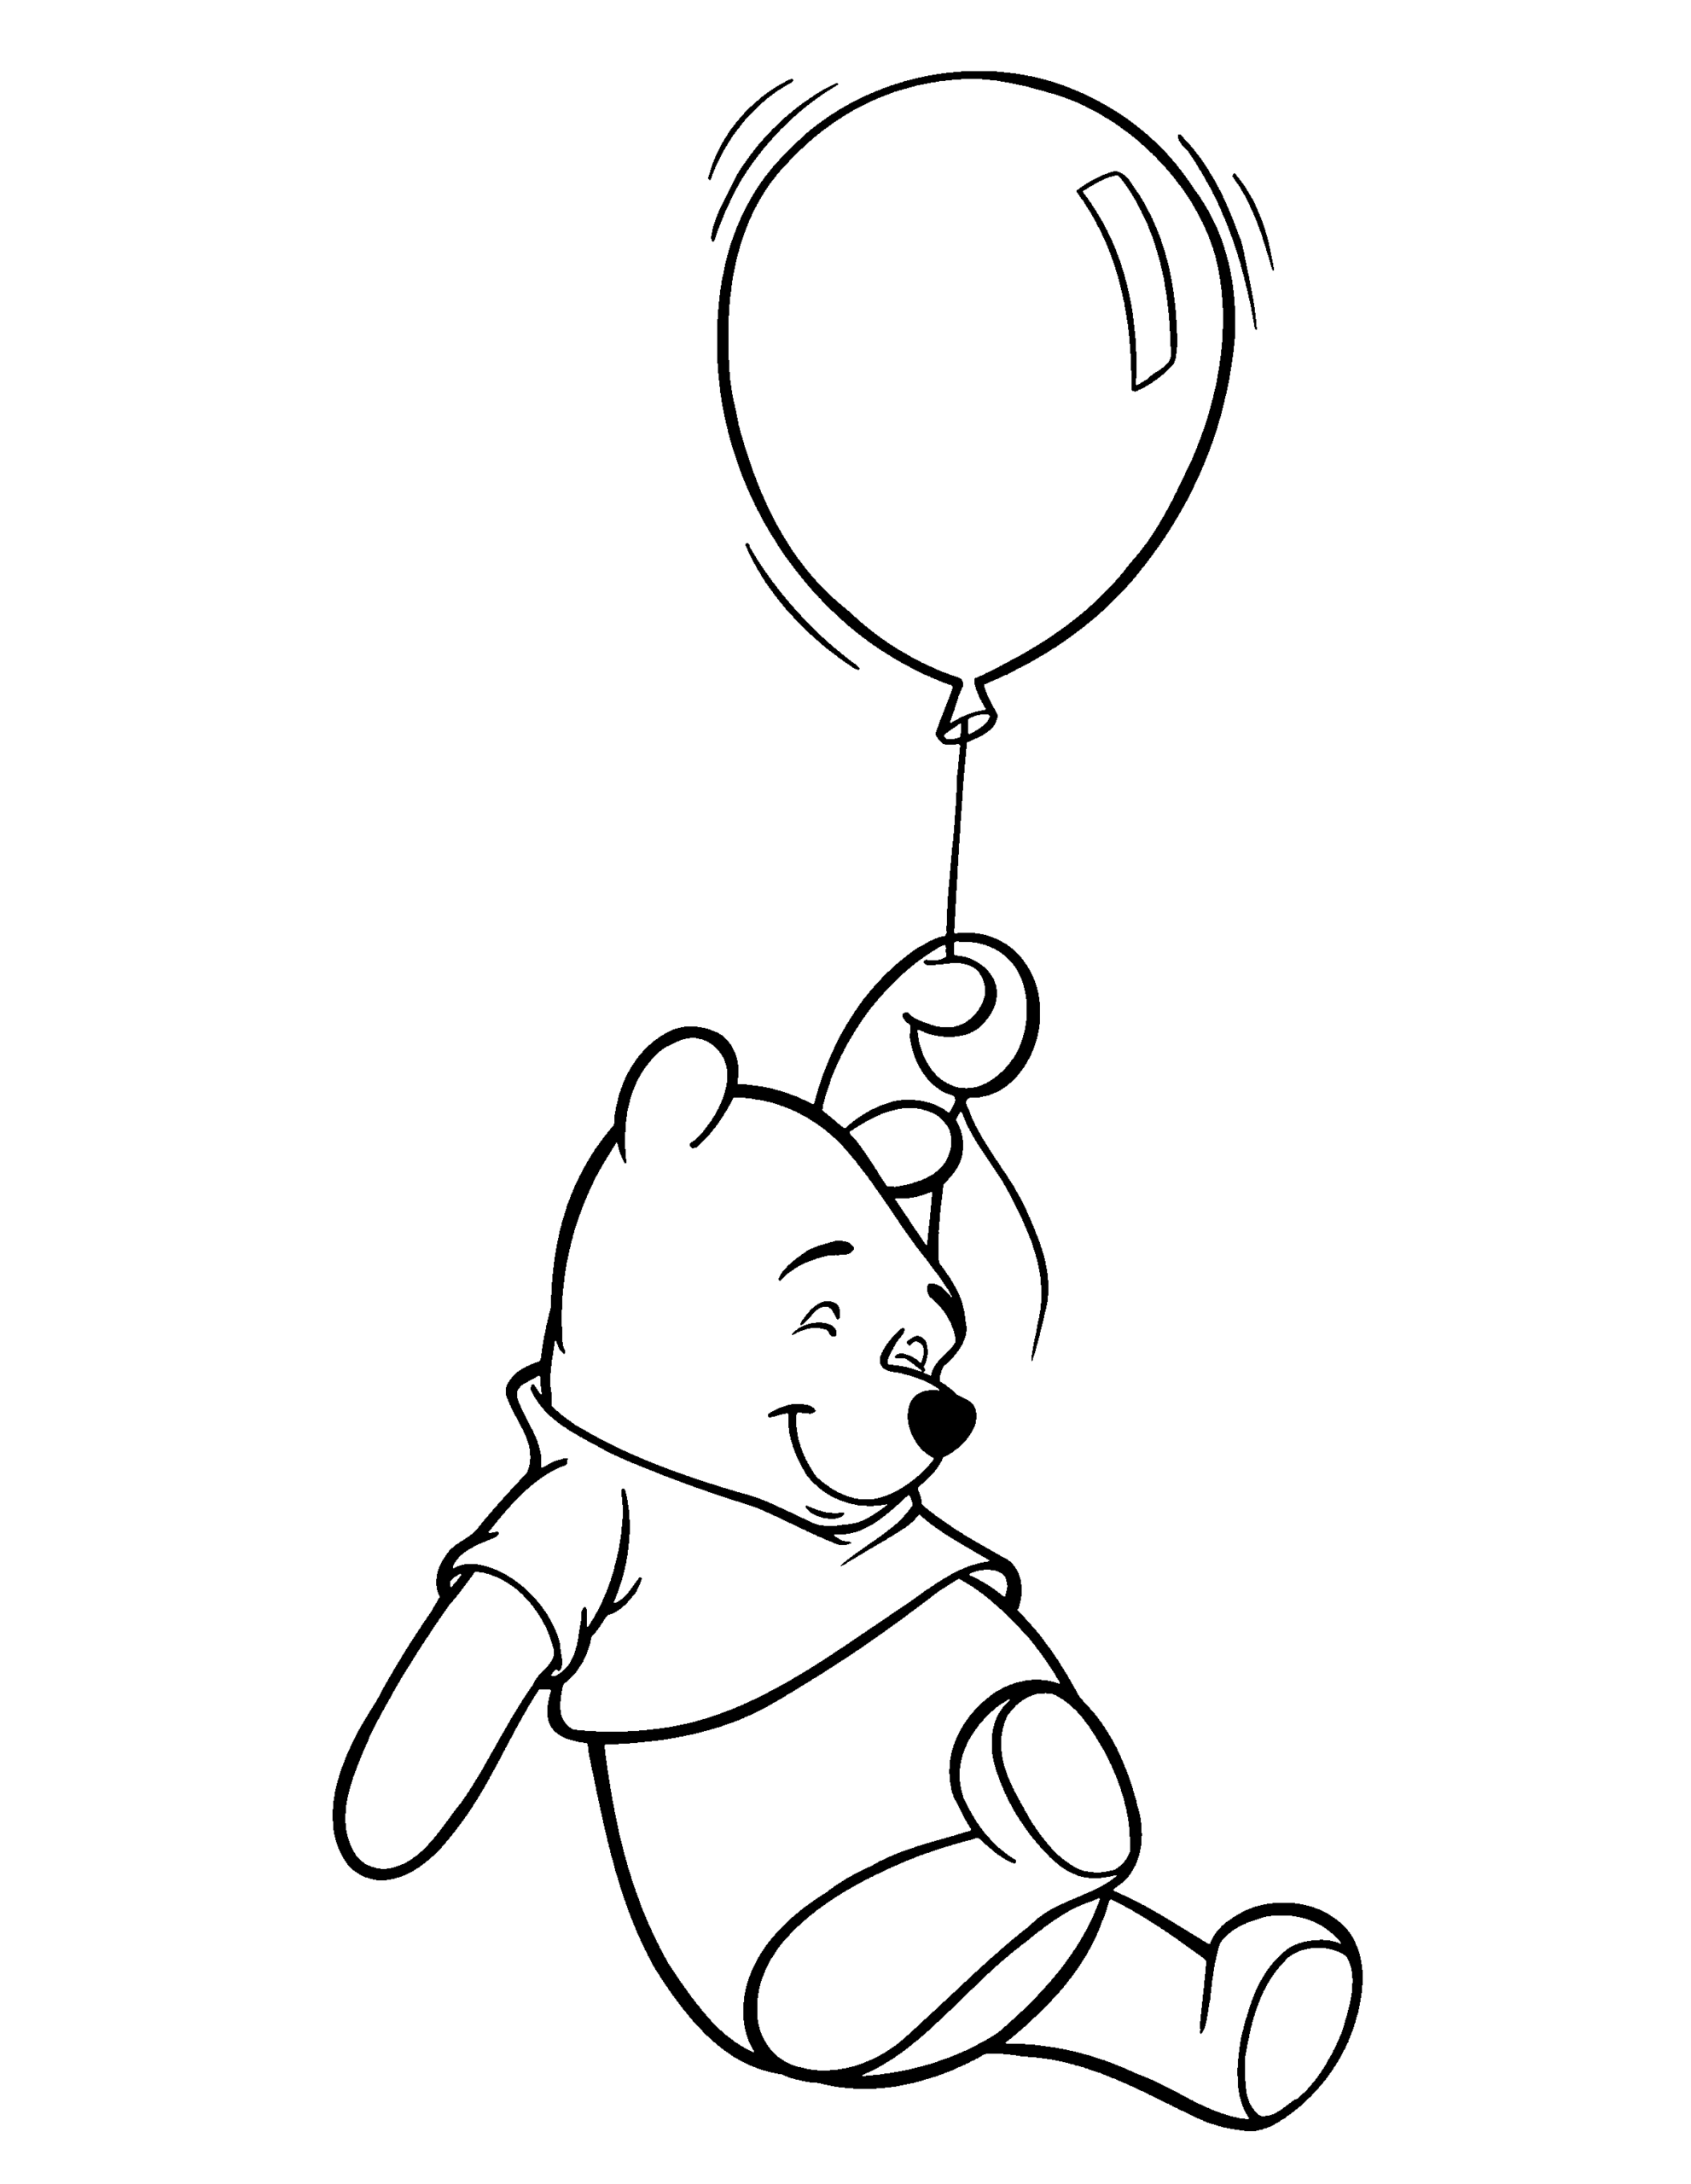 Winnie the Pooh Coloring Pages Cartoons winnie the pooh 71 Printable 2020 7190 Coloring4free